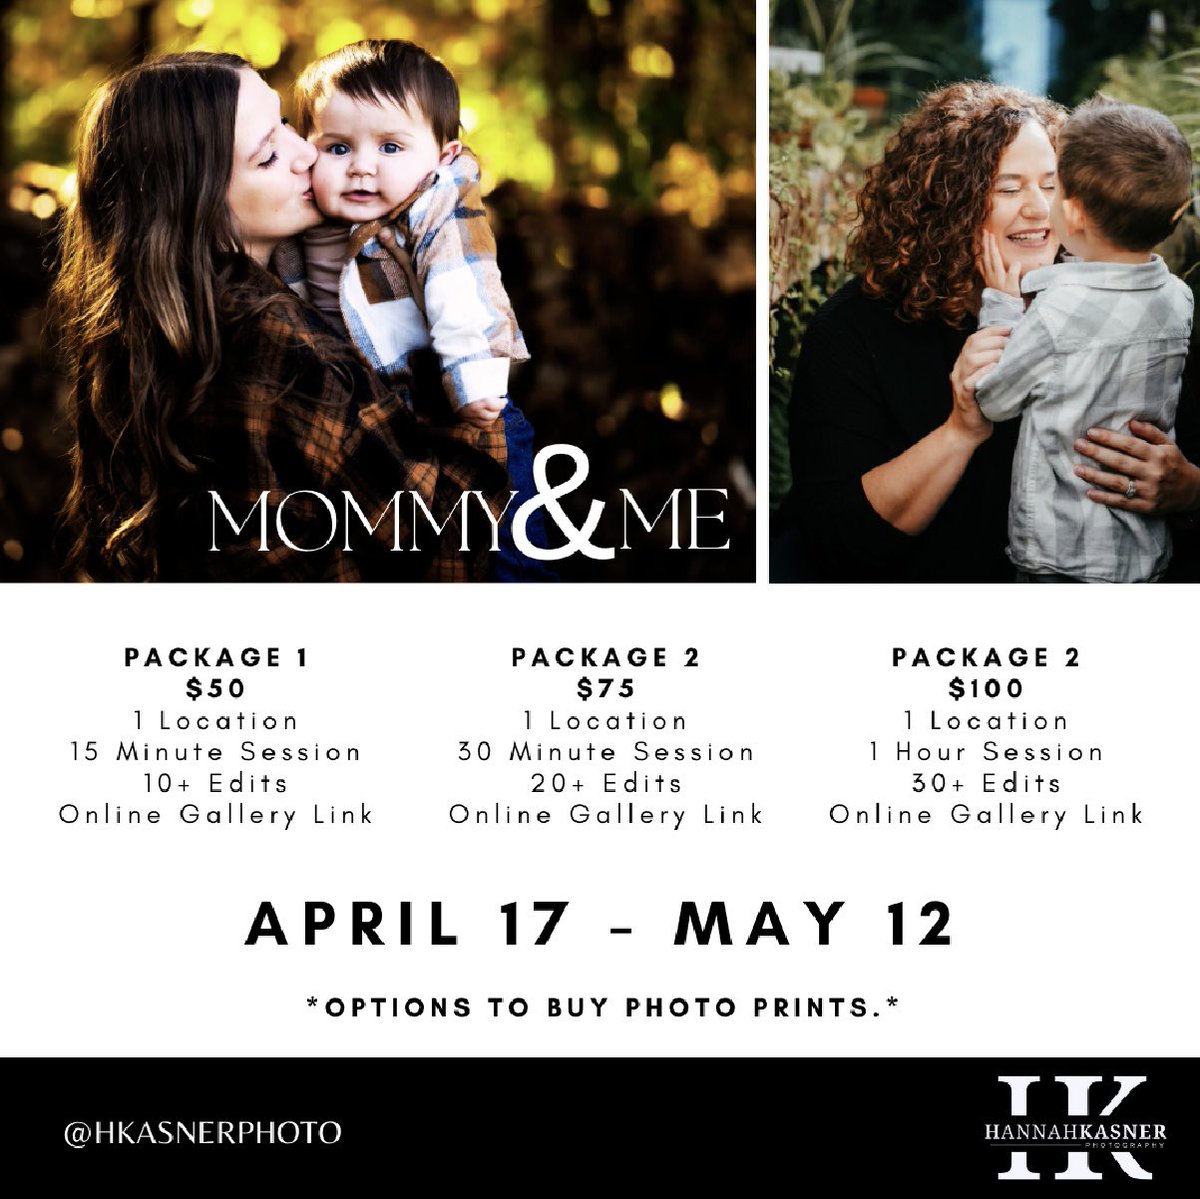 Mother’s Day is right around the corner! 5.12.24 💐 MOMMY&ME PHOTO SESSIONS 💐 Can be used for Mothers + Grandmothers. Purchase a session and/or gift certificate.
#mommyandmephotography #mommyandmeminis #mommyandmephotos #mommyandme